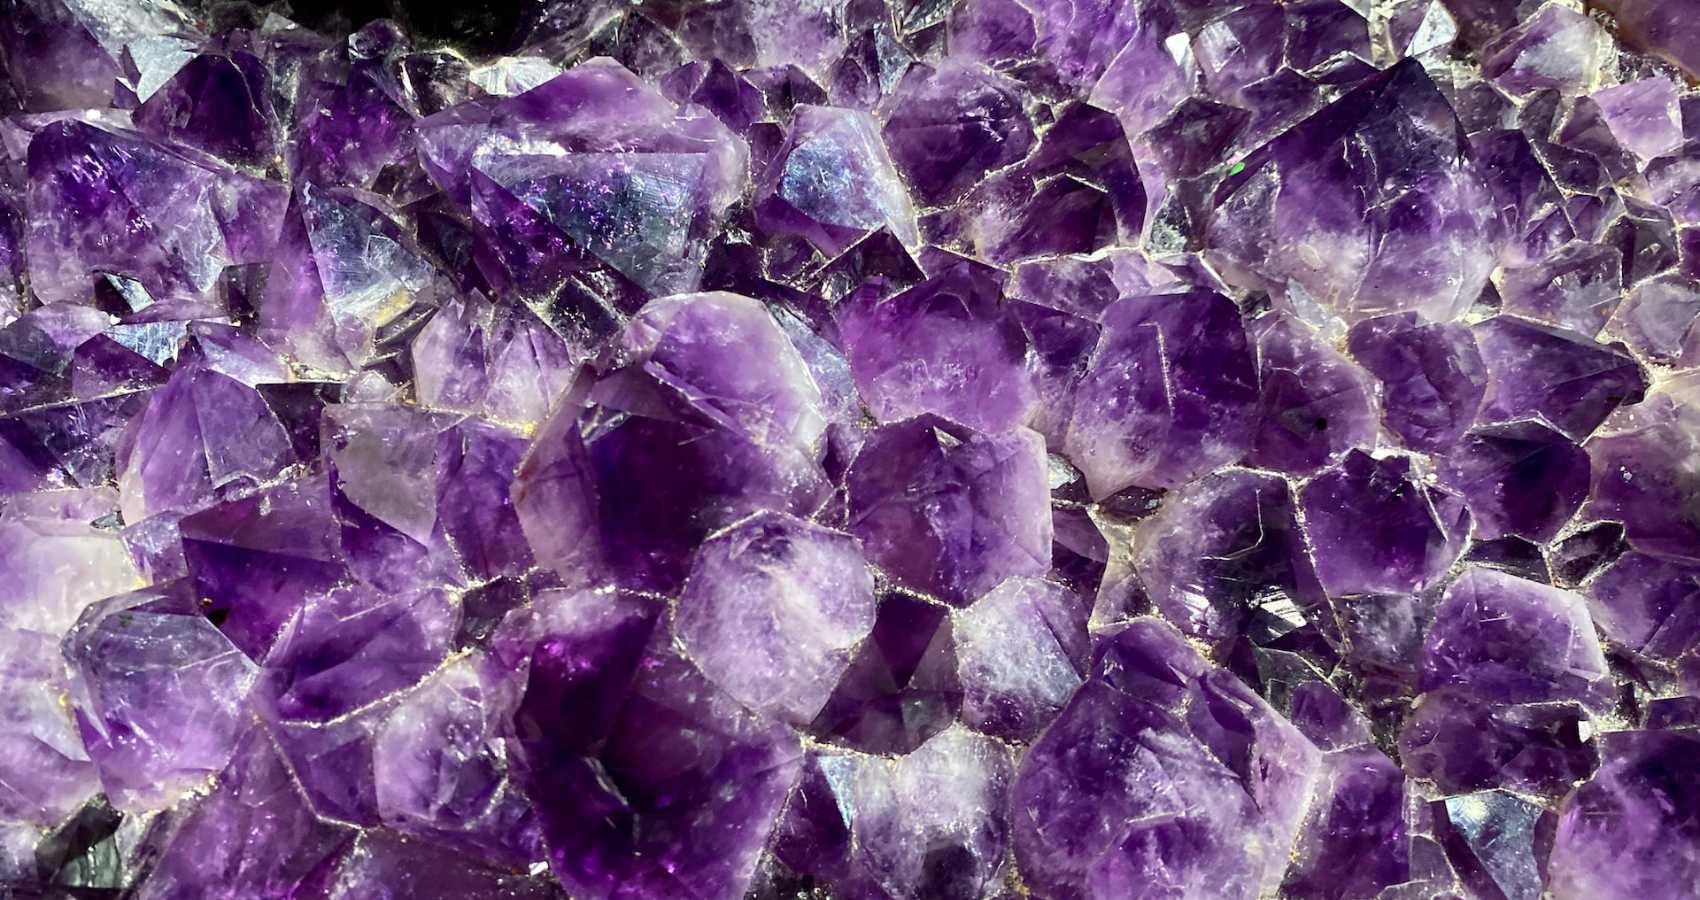 Amethyst Bed, poetry by Angel Edwards at Spillwords.com